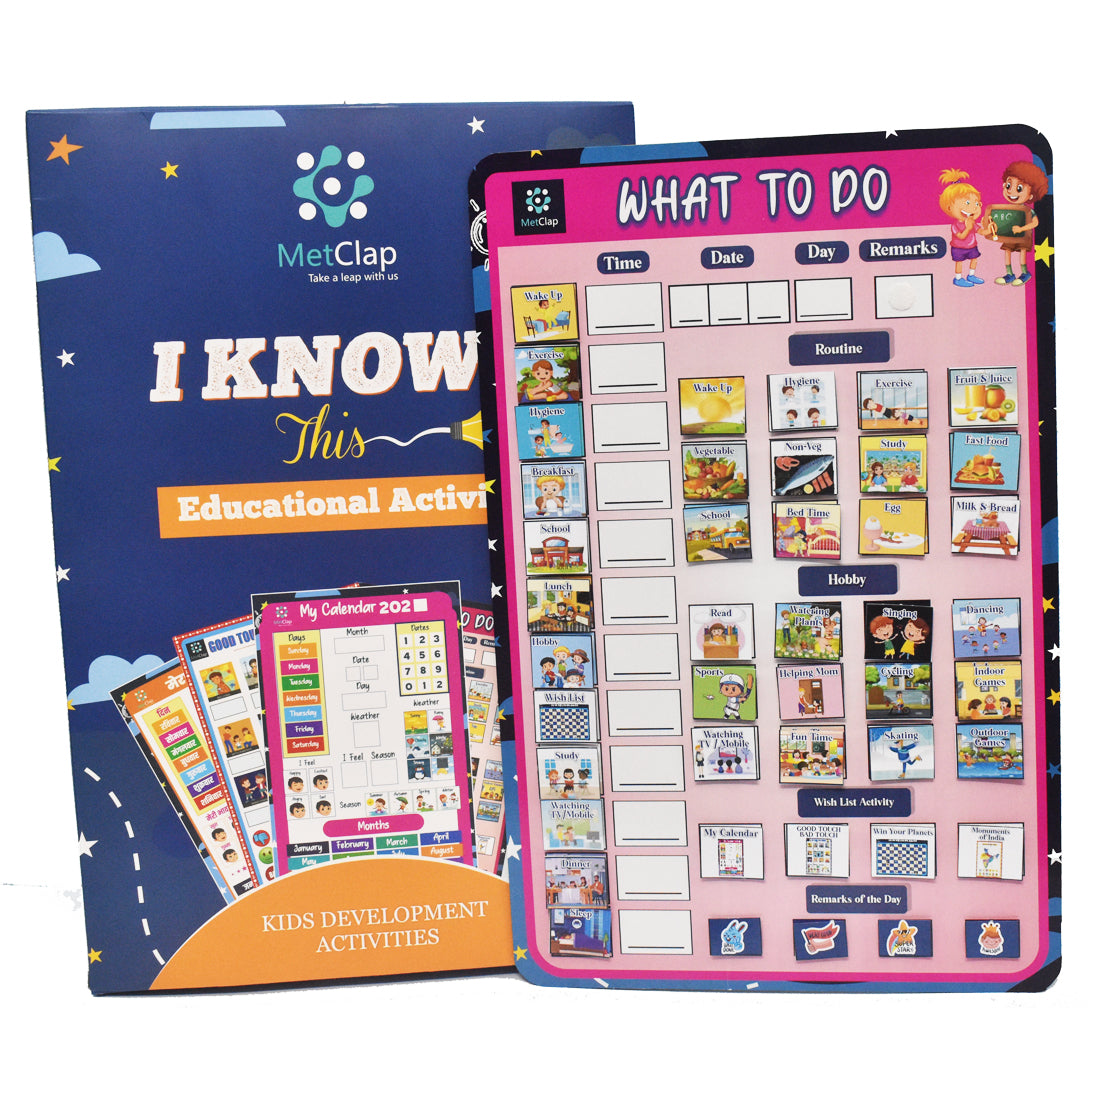 What To Do Activity Board Game for Kids